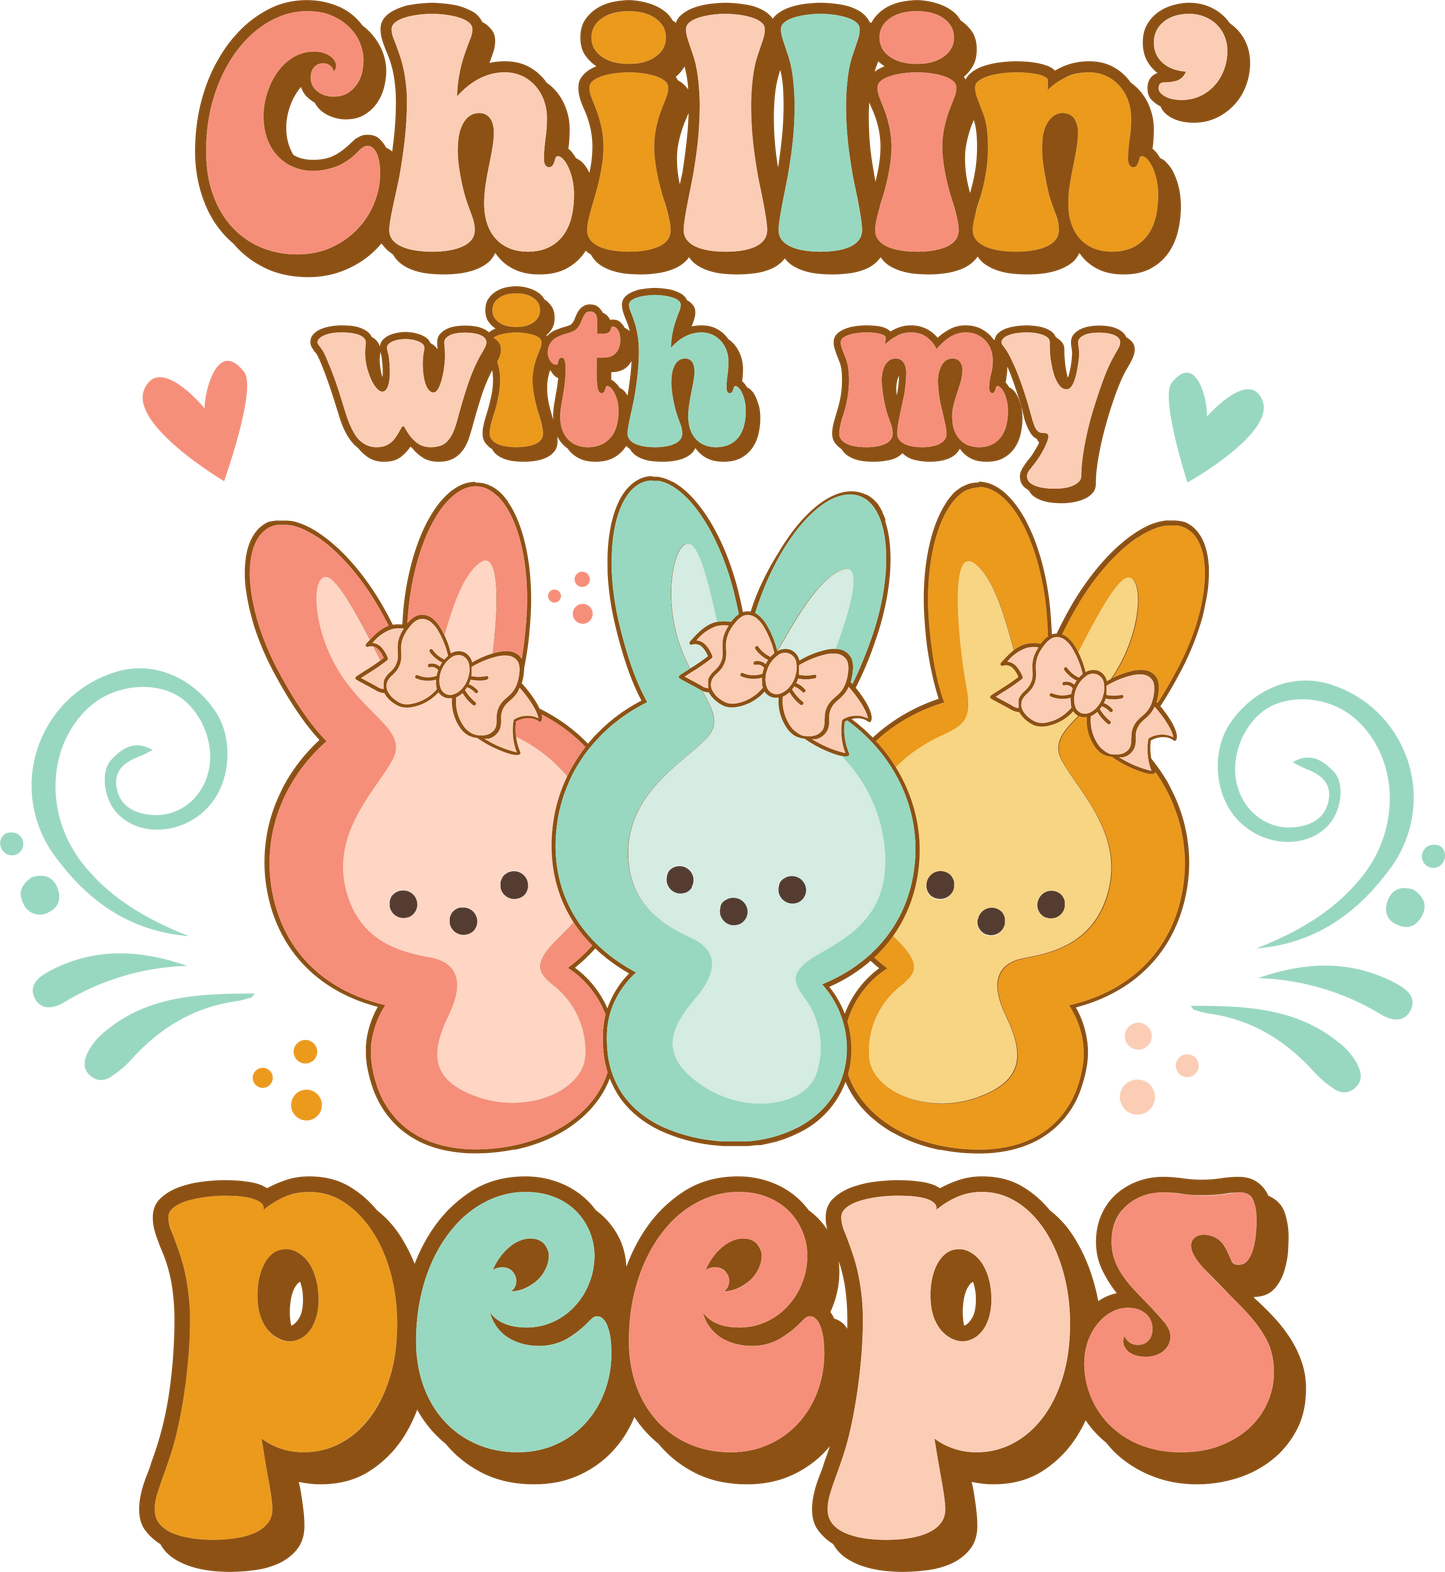 CHILLIN WITH MY PEEPS